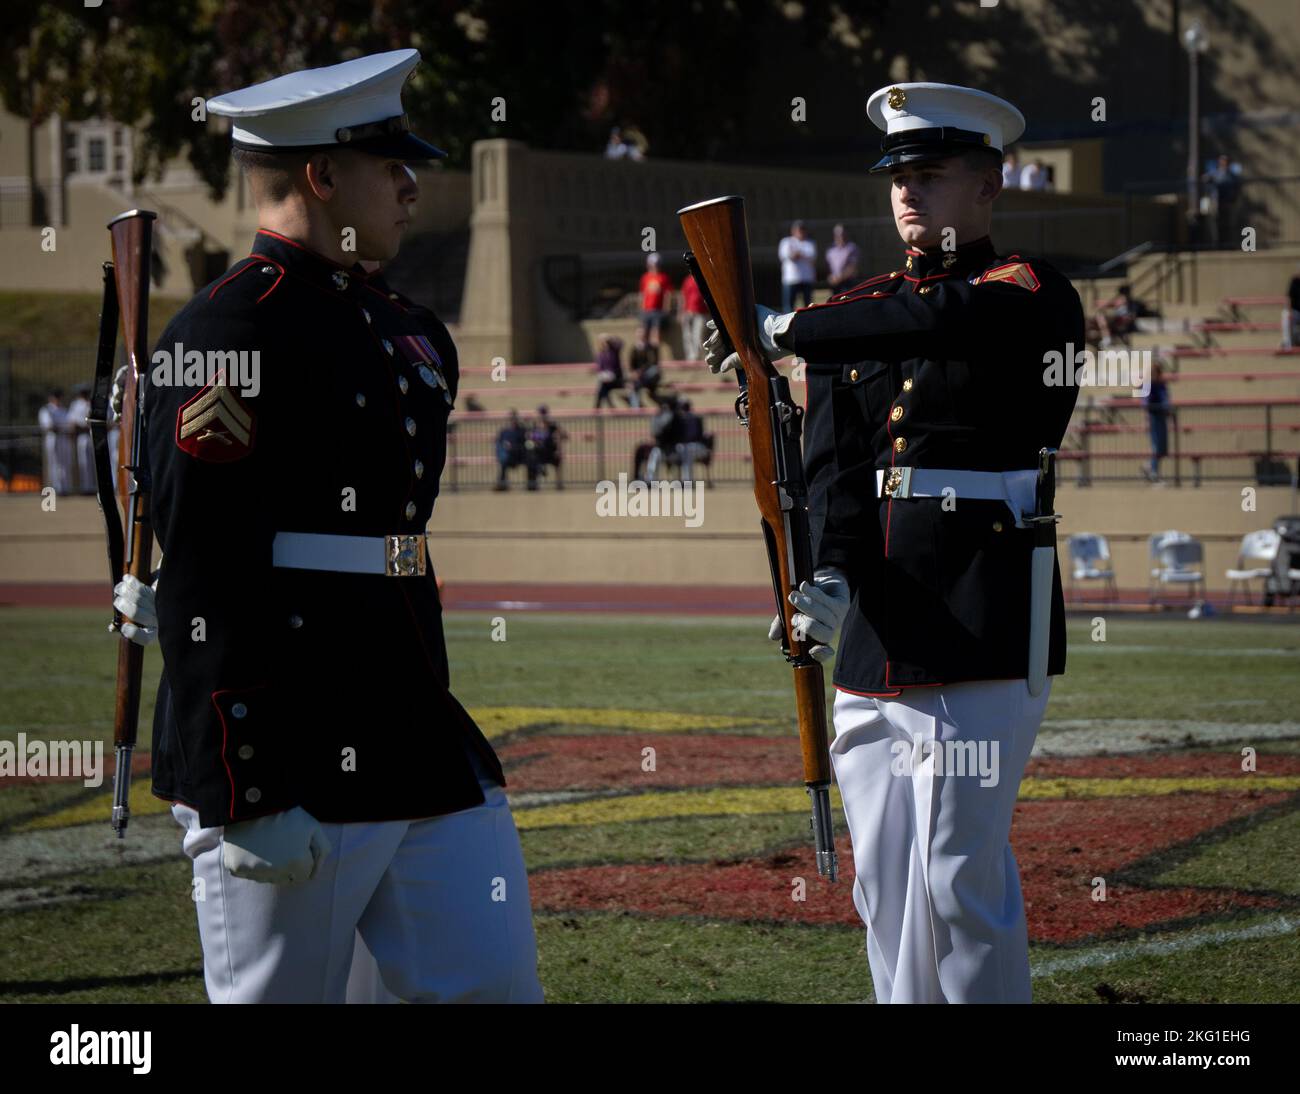 Cpl. Ty A. Blair and Cpl. Steven A. Almaguer, Marines with “The Silent Drill Platoon,” Marine Barracks Washington, perform their “rifle inspection” sequence during a Virginia Military Institute football game at Lexington, Va., Oct 22, 2022. The Marines performed for thousands of cadets and family members attending the game, demonstrating the professionalism of the United States Marine Corps. Stock Photo